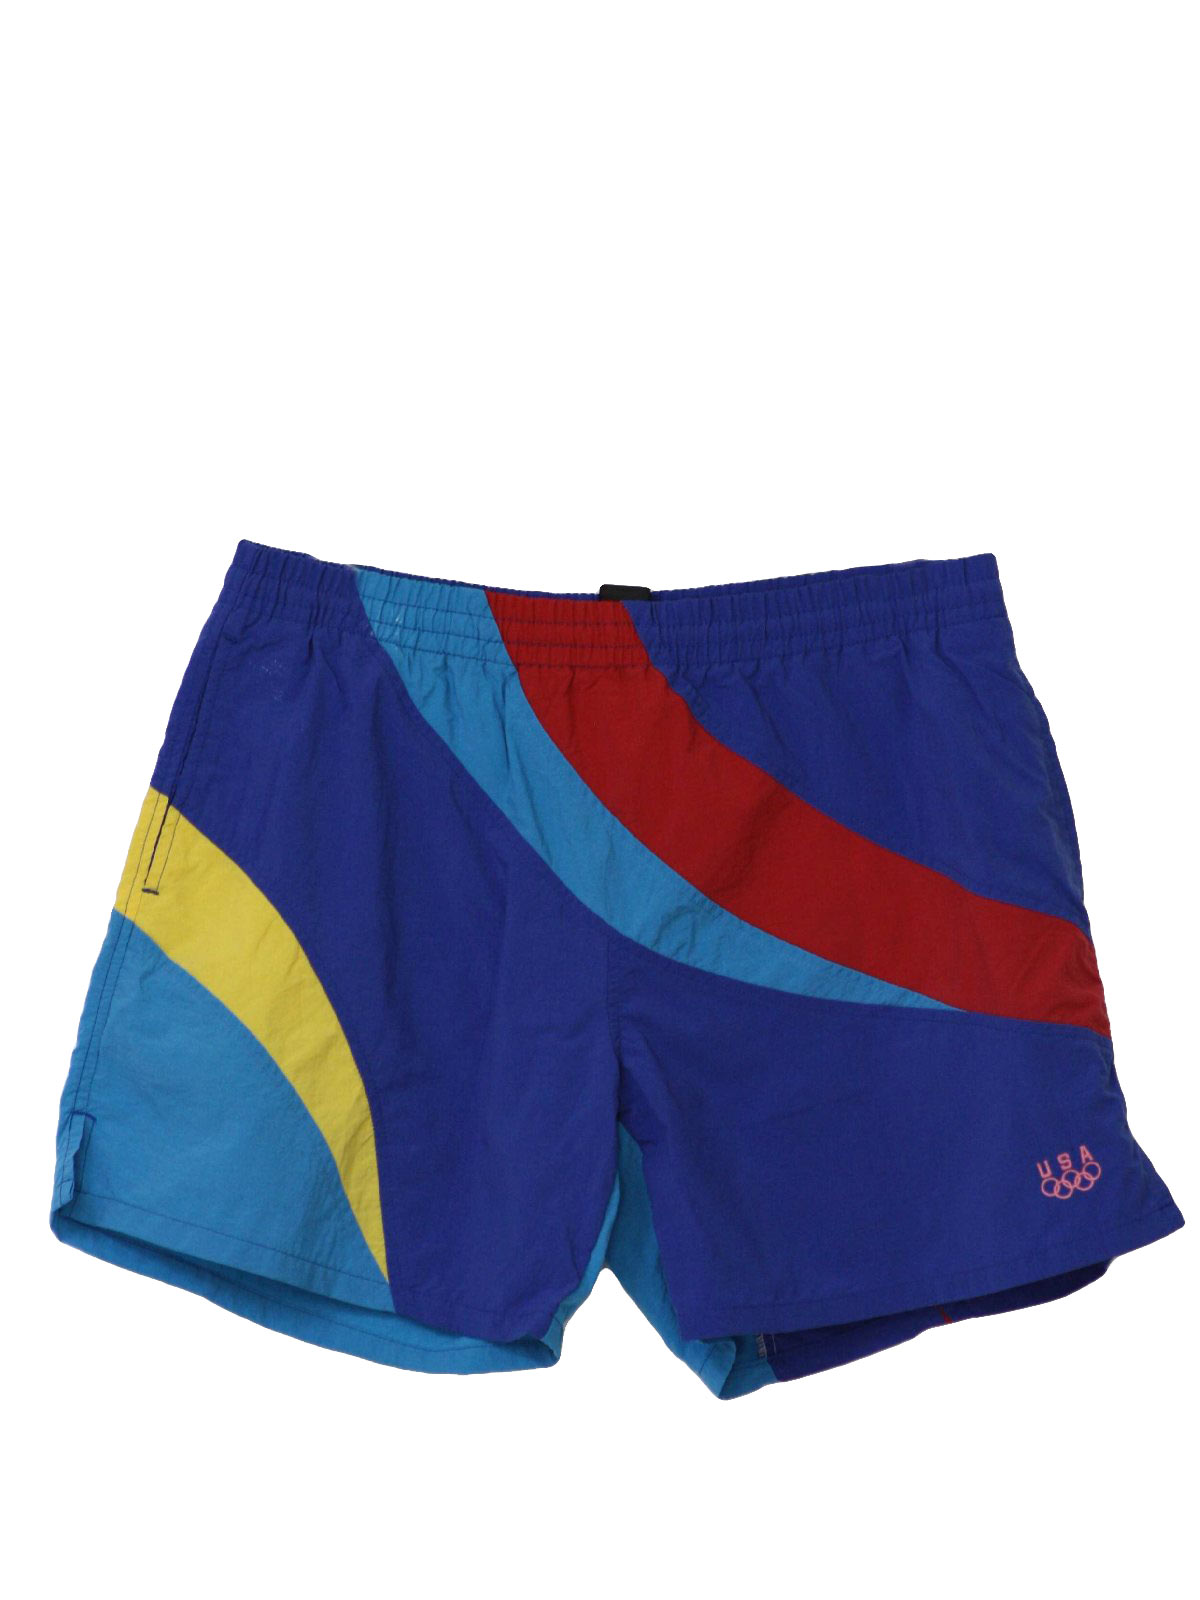 1980s USA Swimsuit/Swimwear: 80s -USA- Mens shaded blue, red and yellow ...